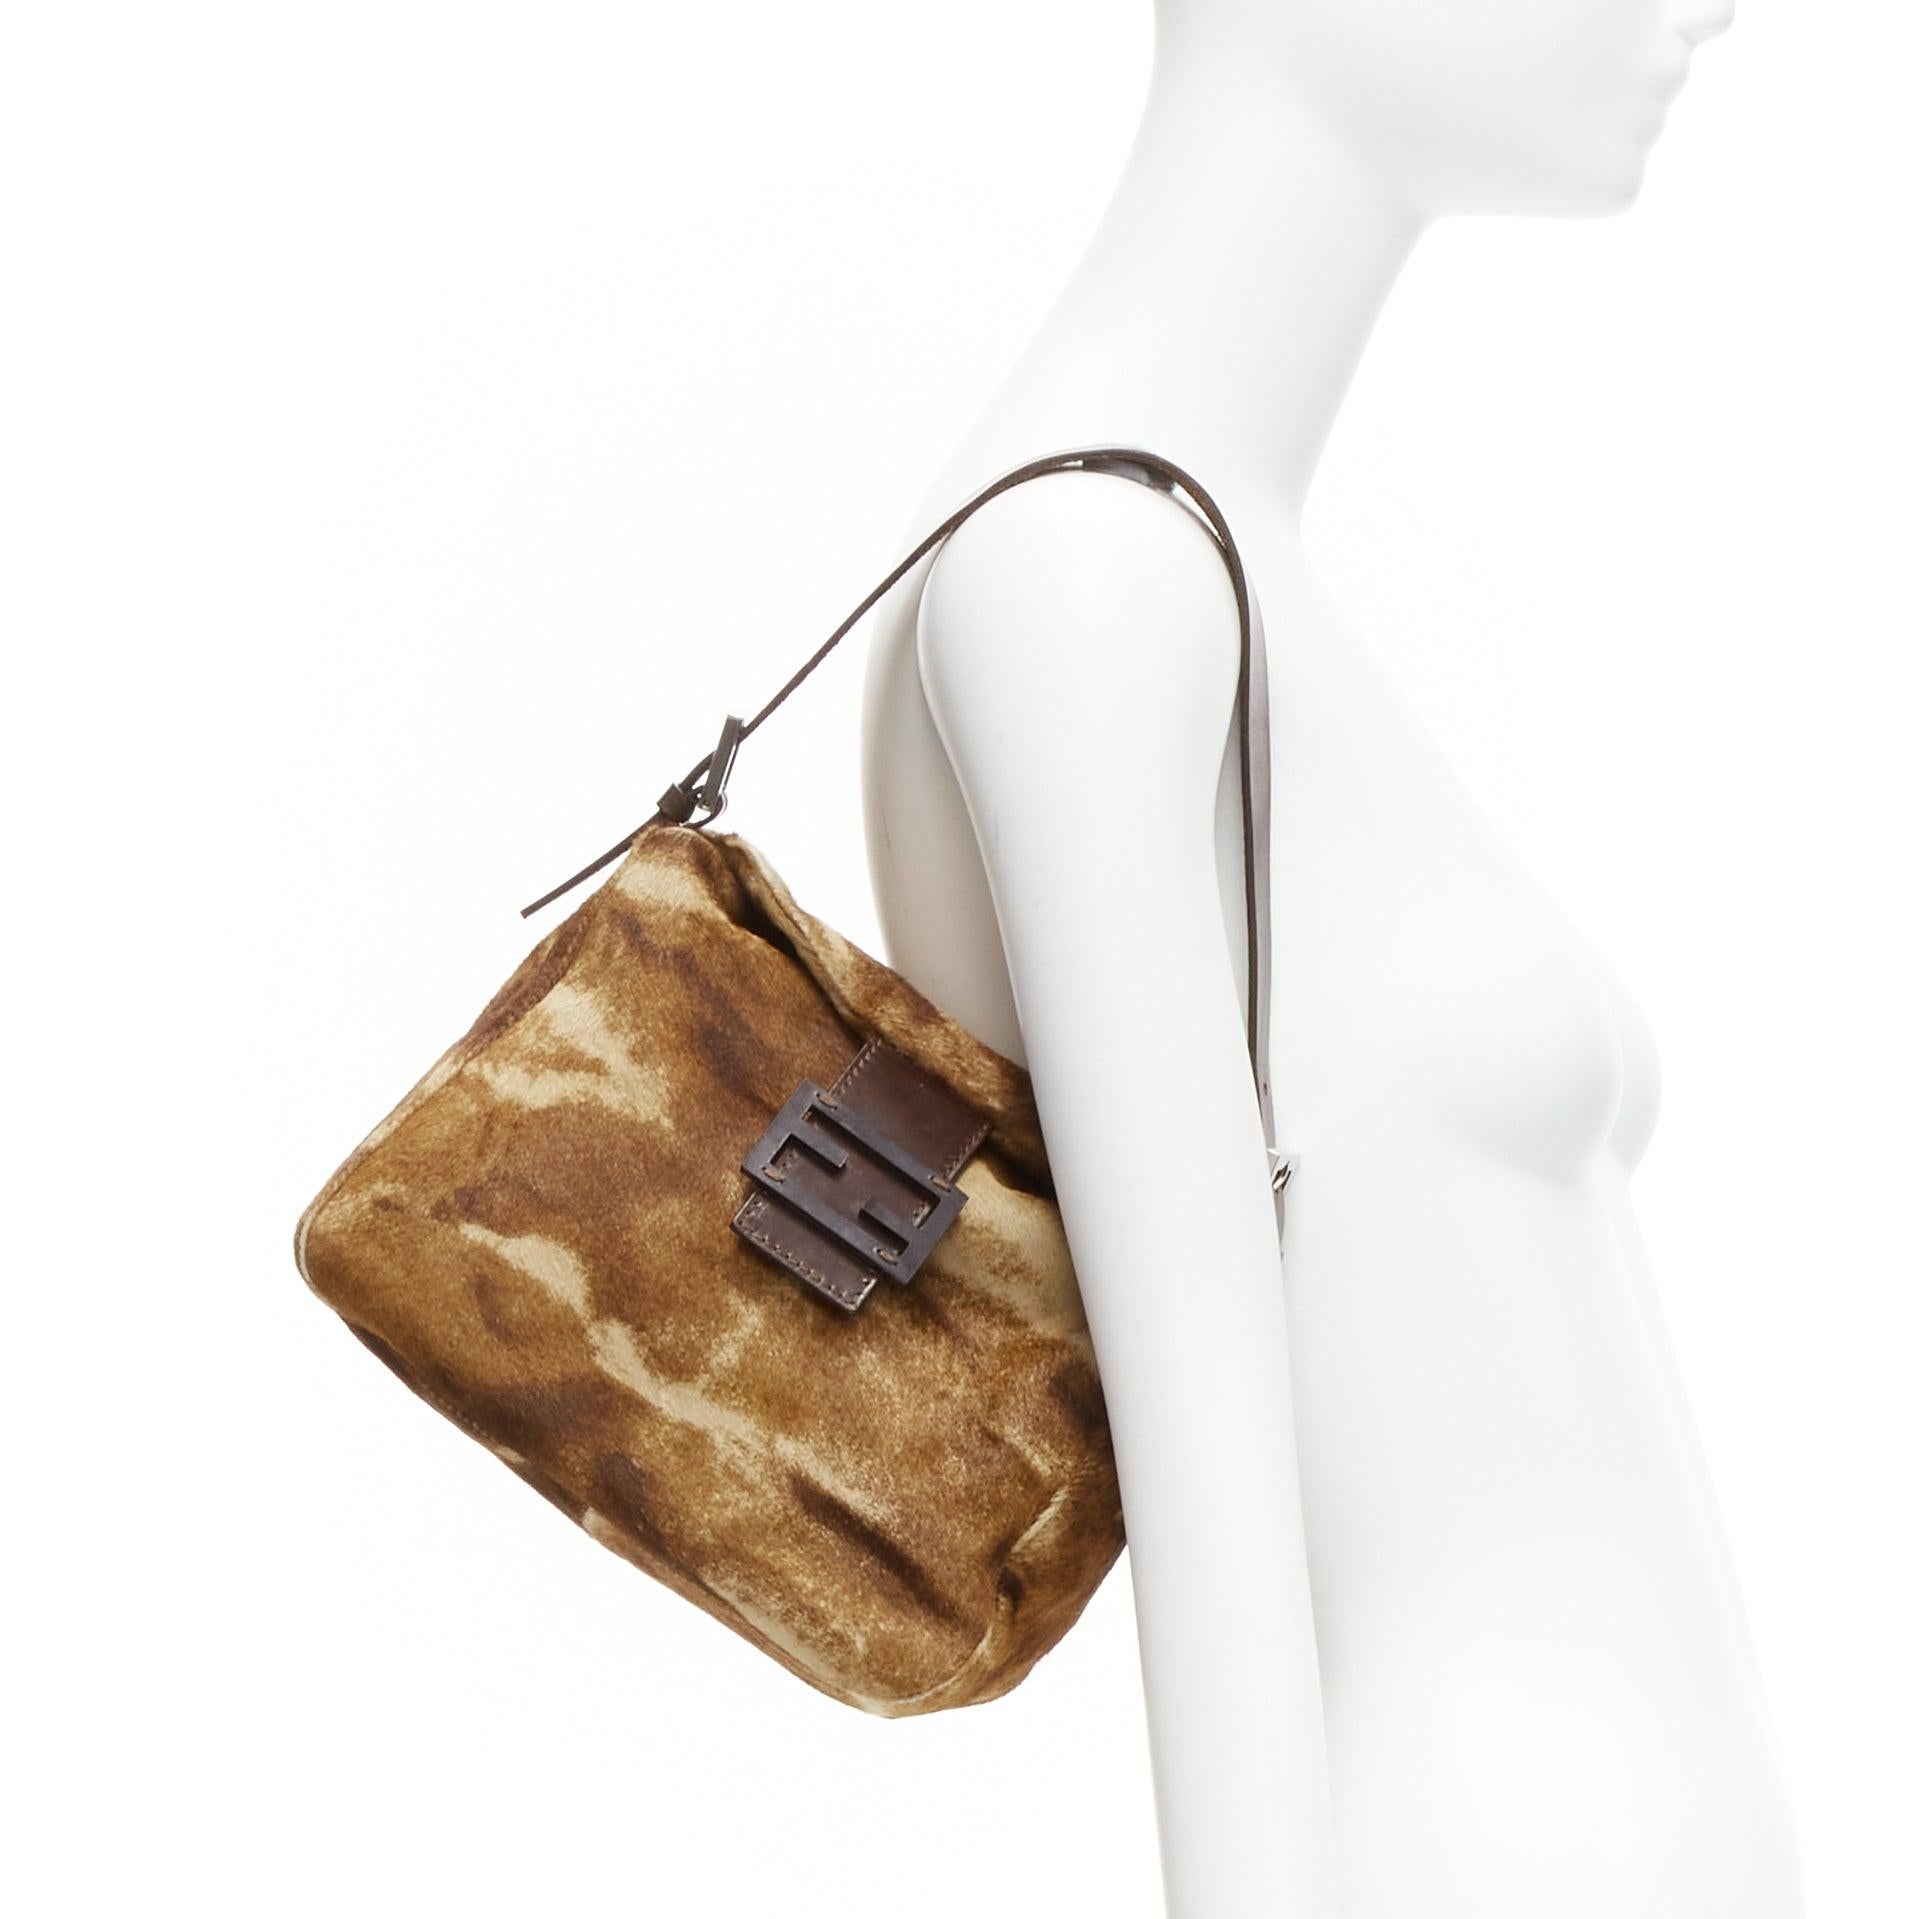 FENDI Vintage Mamma Forever brown ponyhair shoulder baguette bag
Reference: TGAS/D00803
Brand: Fendi
Model: Mamma Forever
Material: Pony Hair, Leather
Color: Brown
Pattern: Animal Print
Lining: Bronze Fabric
Made in: Italy

CONDITION:
Condition: